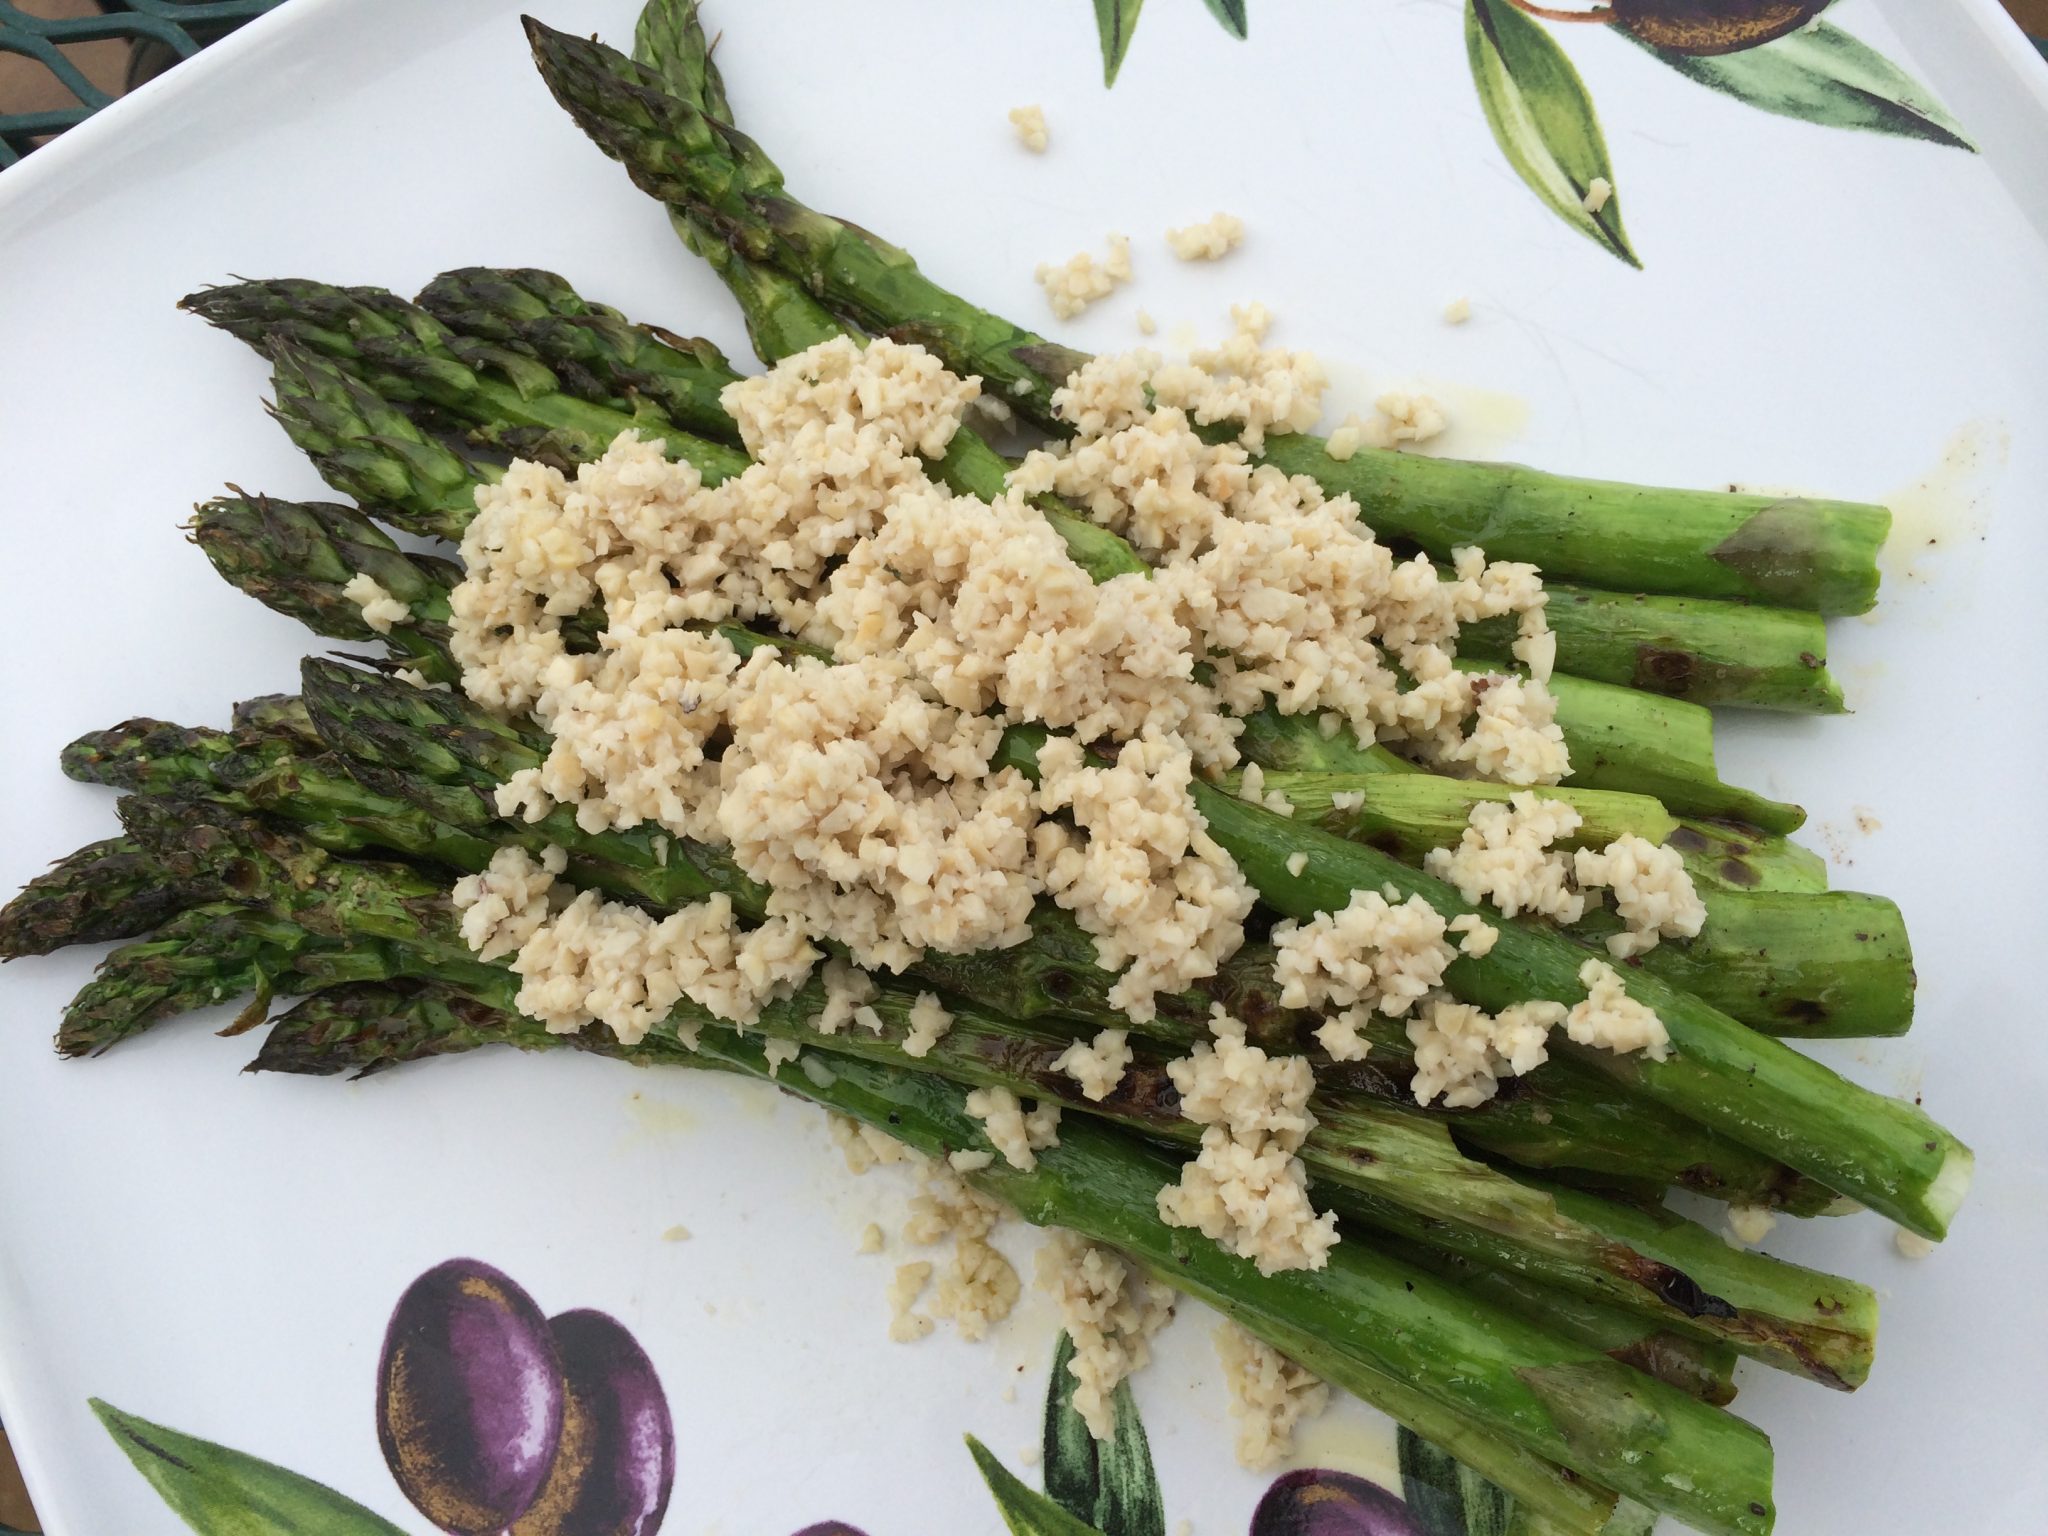 Grilled Asparagus with Cashew “Feta” Cheese